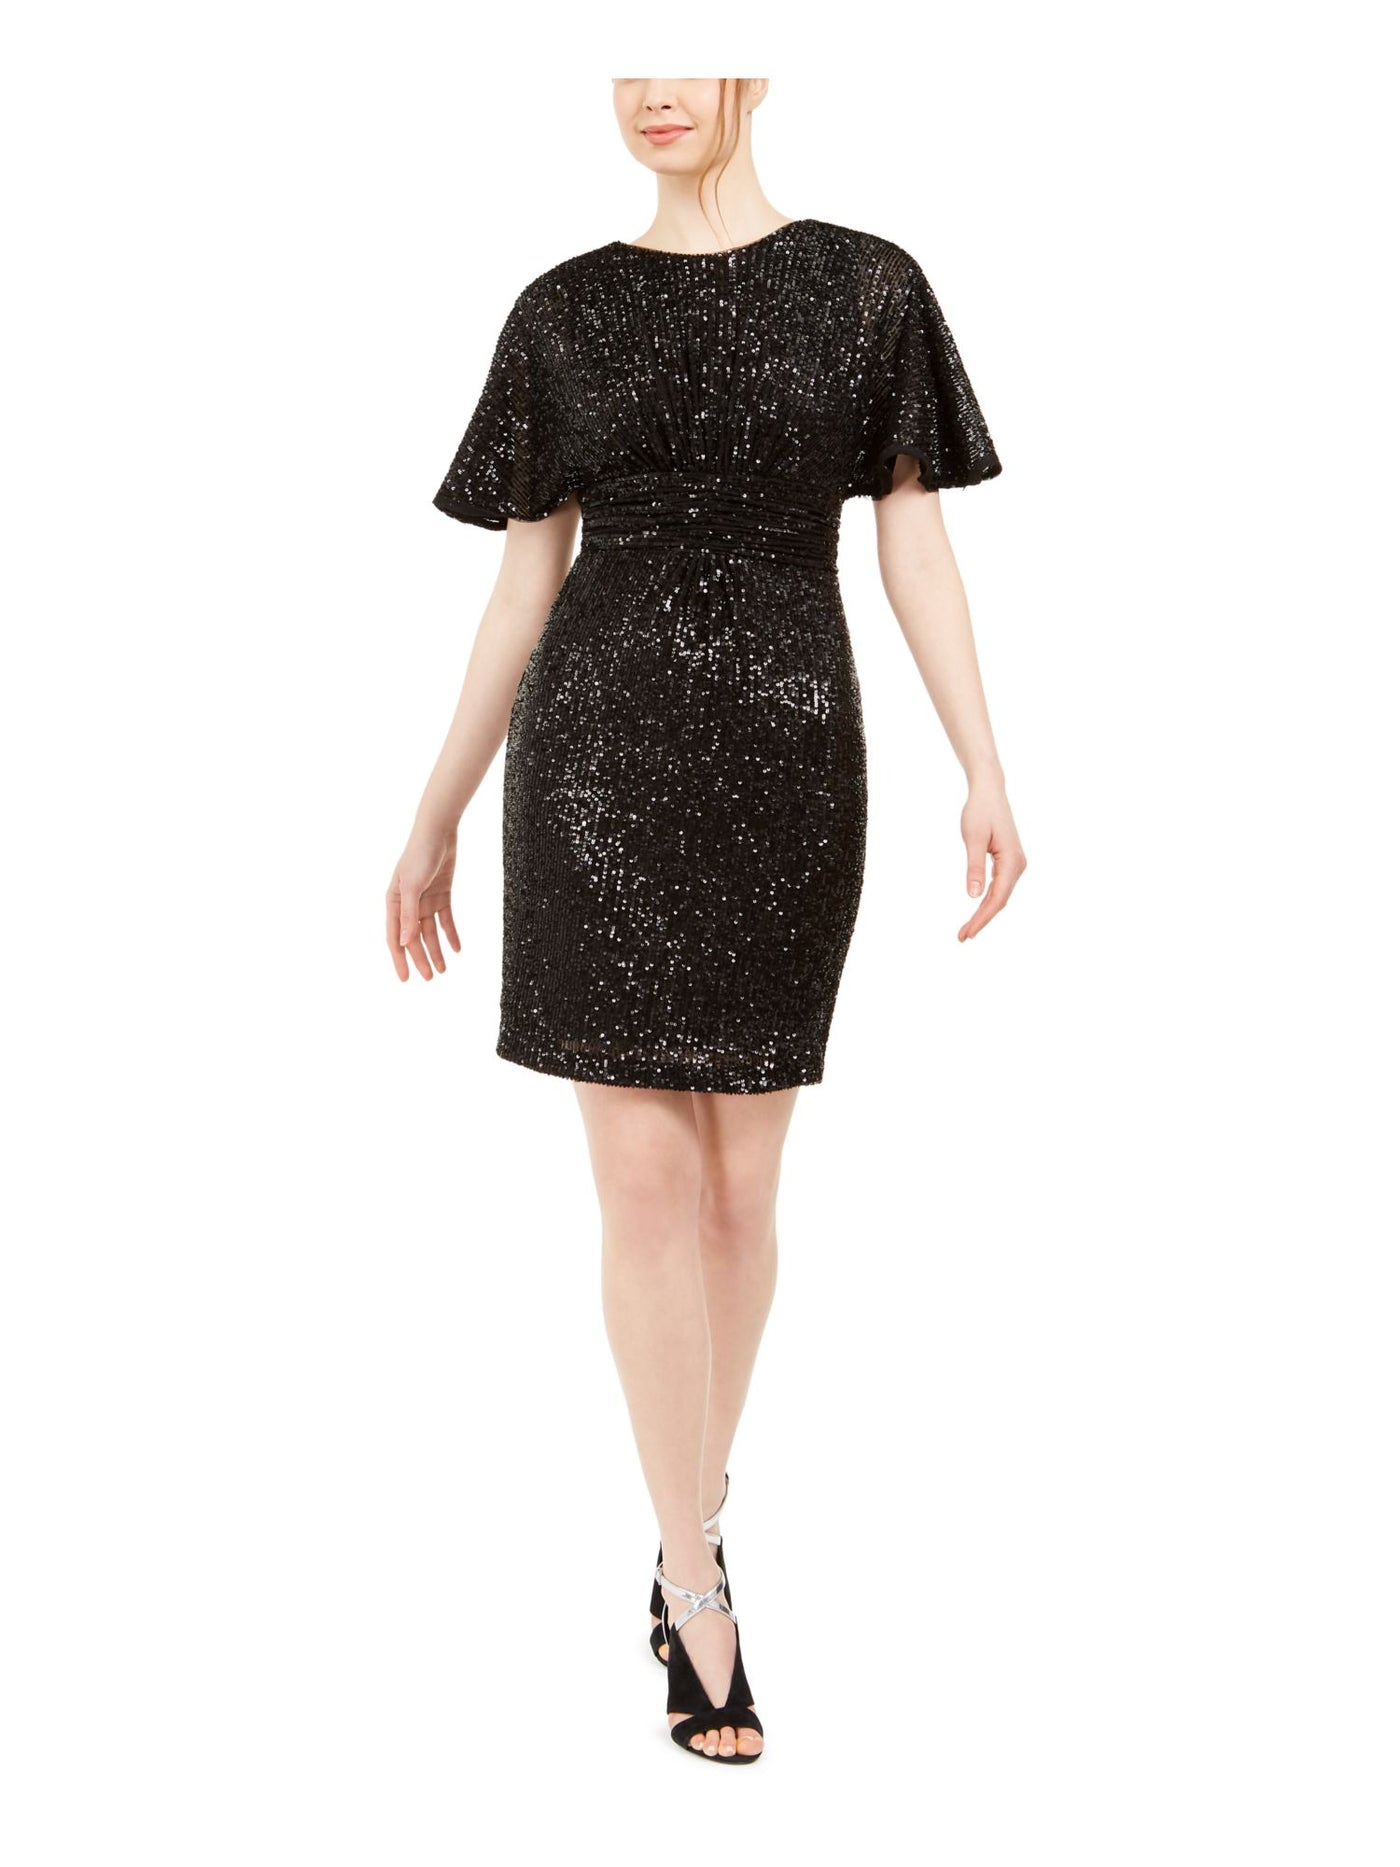 CALVIN KLEIN Womens Black Sequined V-back Bell Sleeve Crew Neck Above The Knee Party Sheath Dress 6